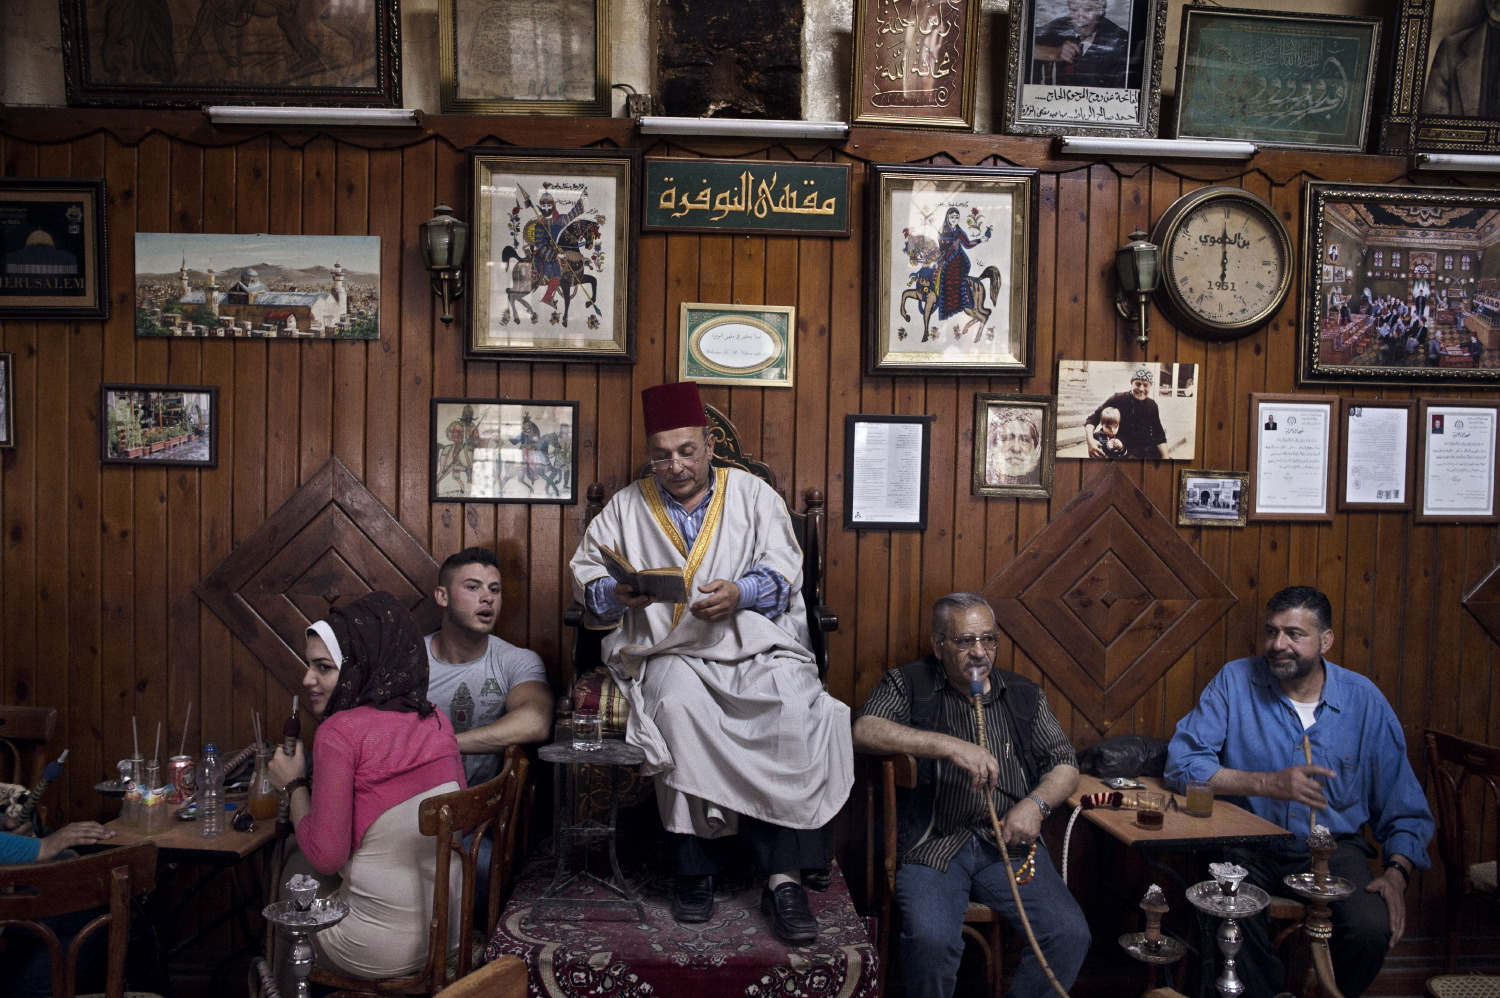 At the al Nawfara coffee shop in the old city of Damascus, professional story teller Abu Shaadi entertains patrons by reading traditional tales of old Syria, May 15, 2014.